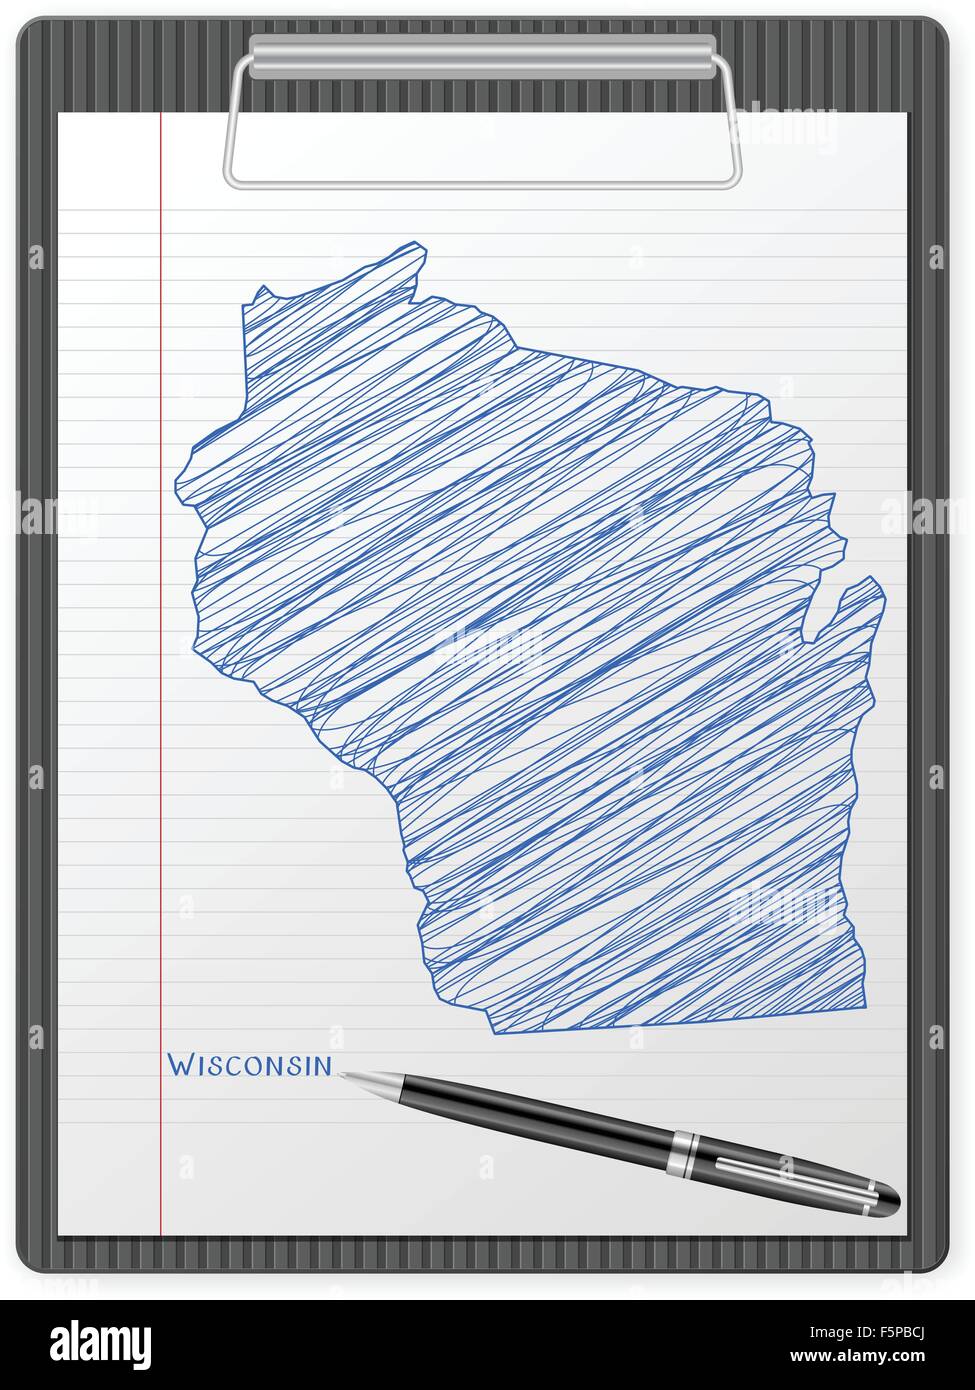 Clipboard with drawing Wisconsin map. Vector illustration. Stock Vector